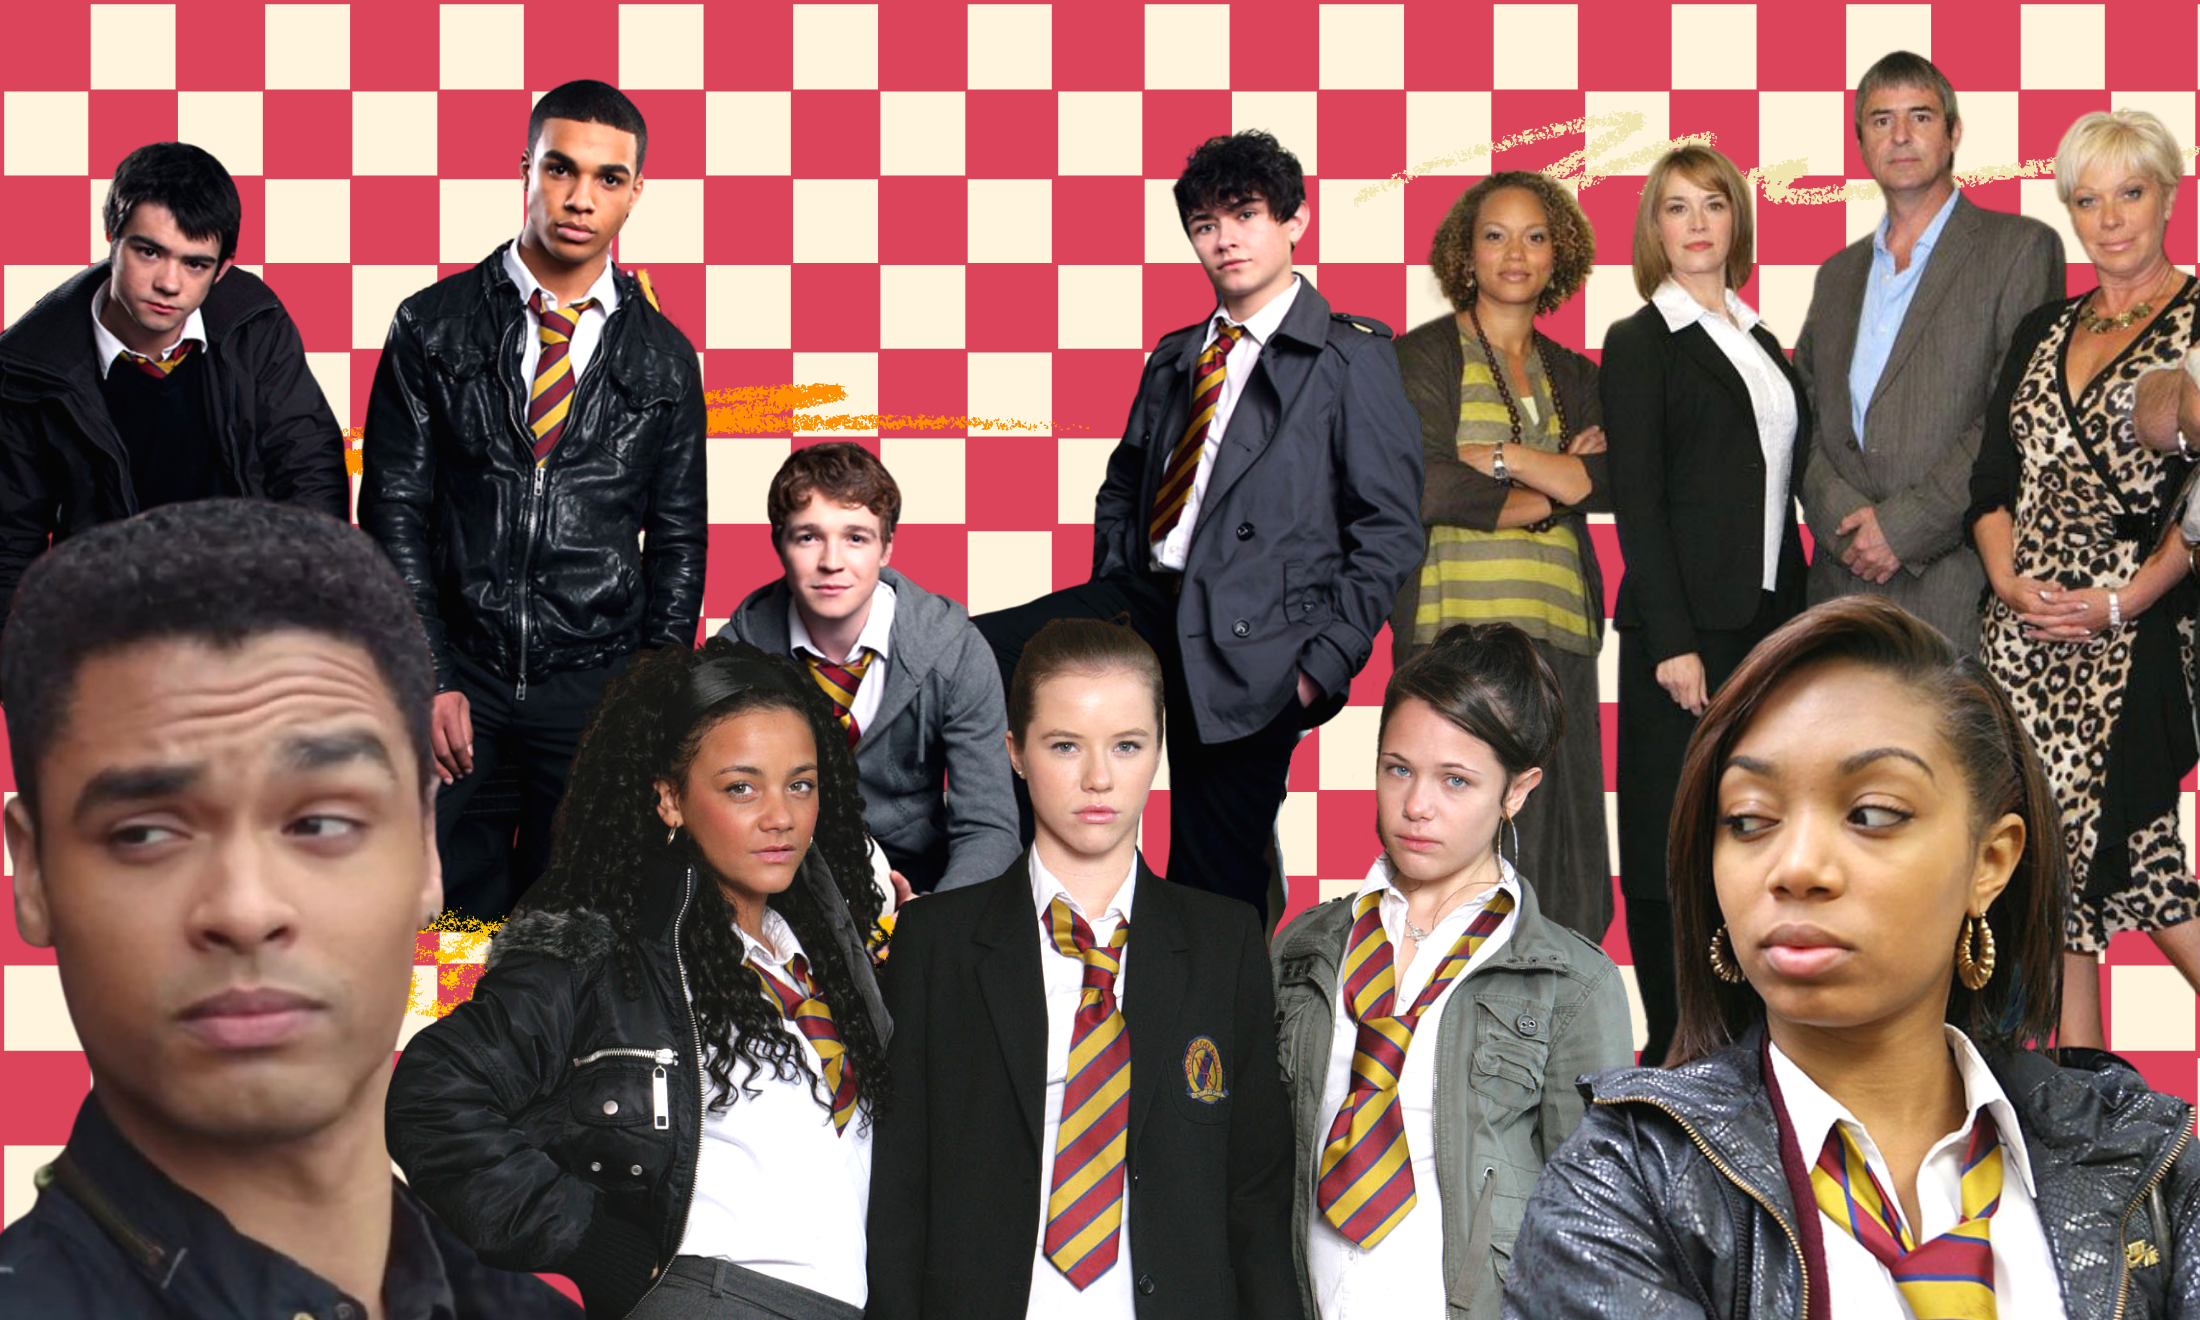 Relive your teens via this oral history of Waterloo Road